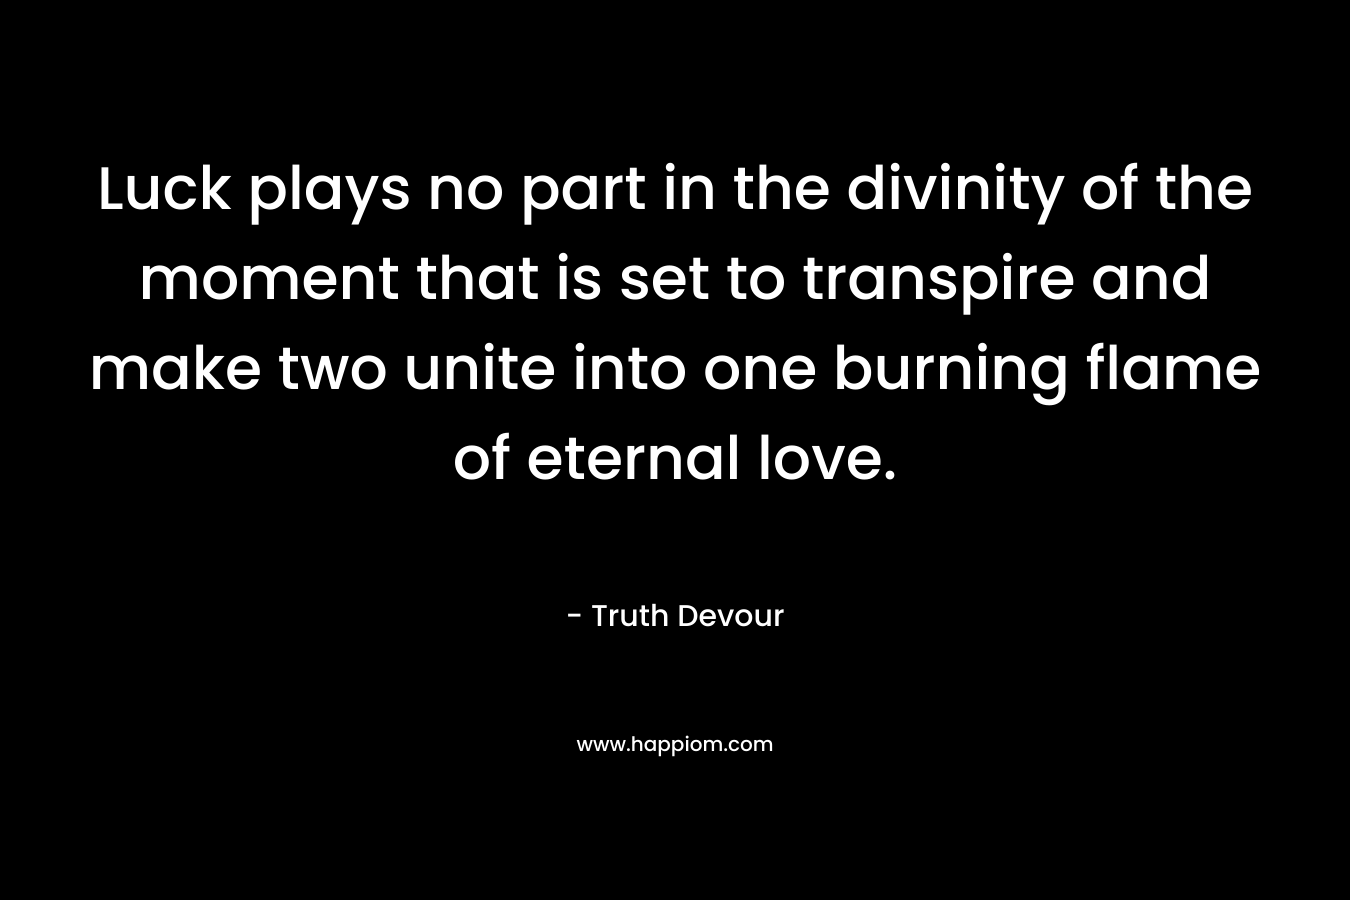 Luck plays no part in the divinity of the moment that is set to transpire and make two unite into one burning flame of eternal love. – Truth Devour